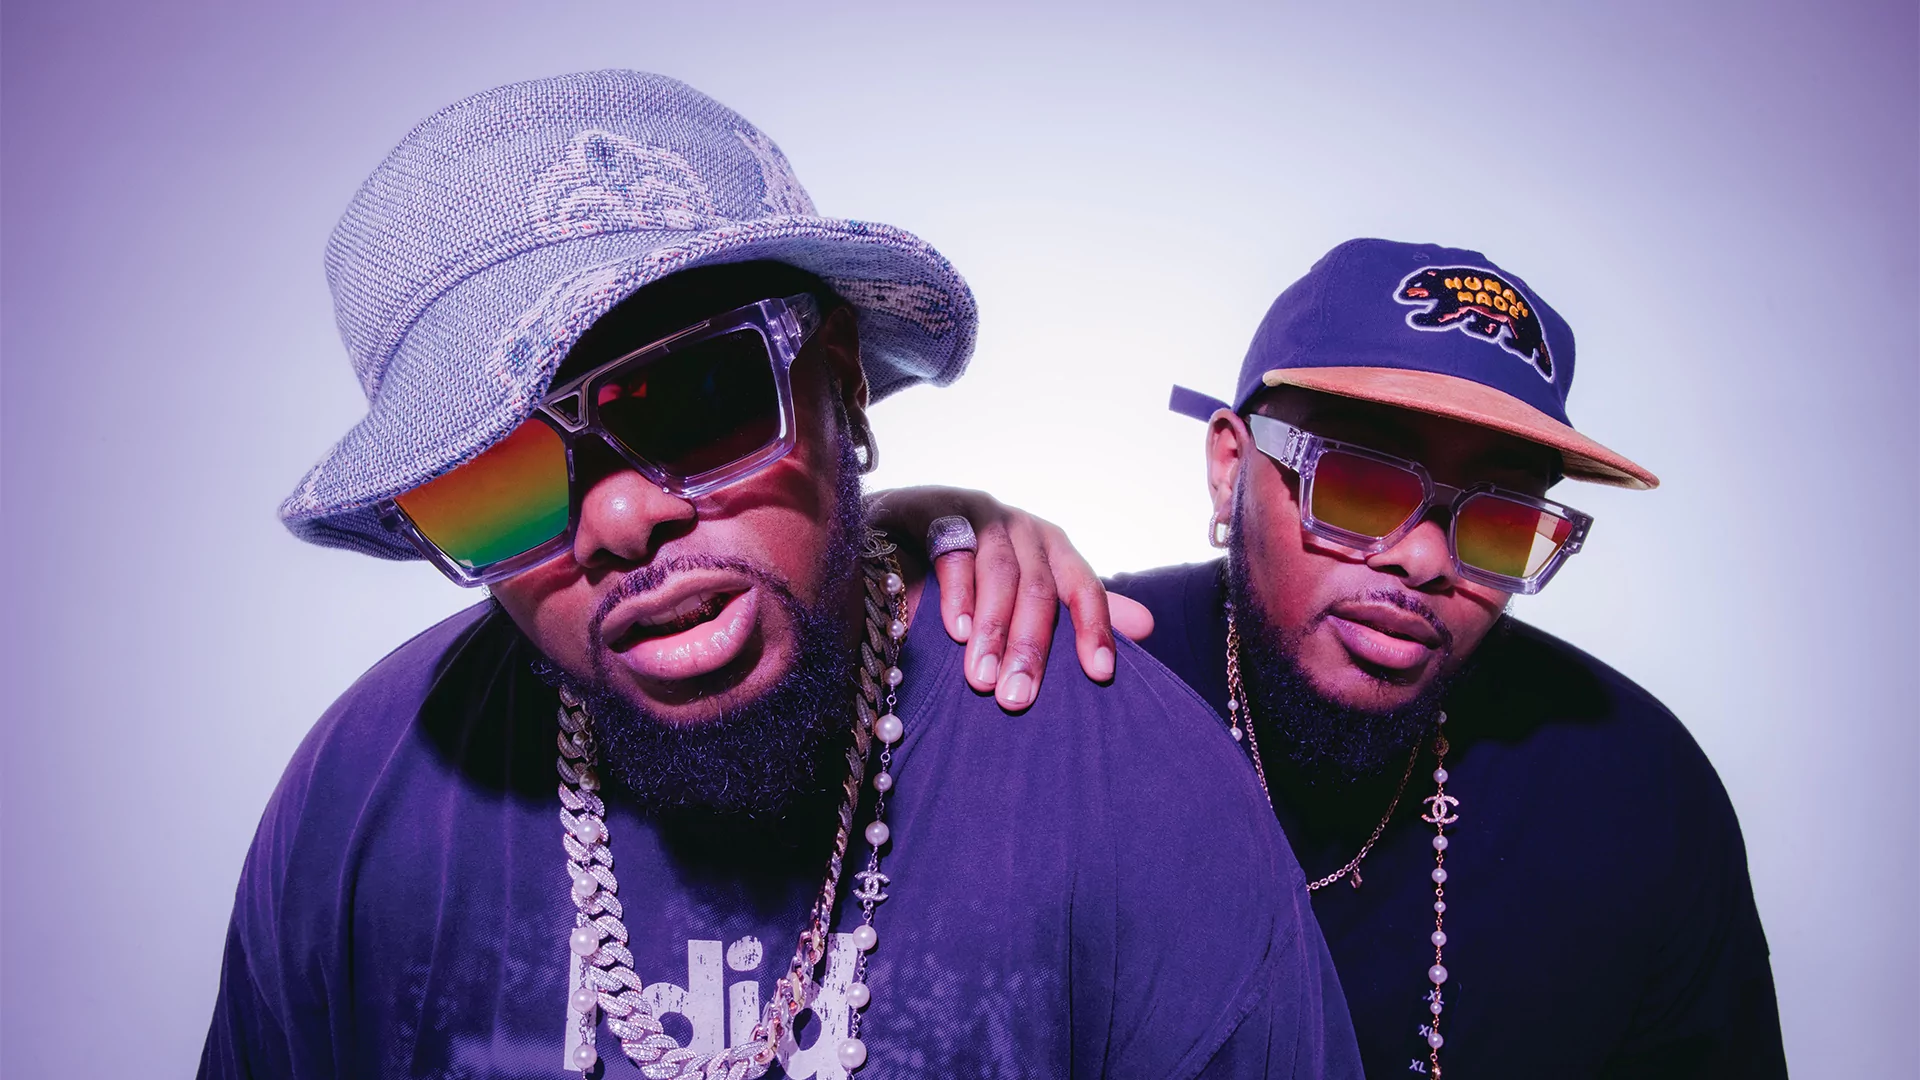 Photo of Bandile and Banele of Major League Djz wearing reflective sunglasses and hats in front of a white background